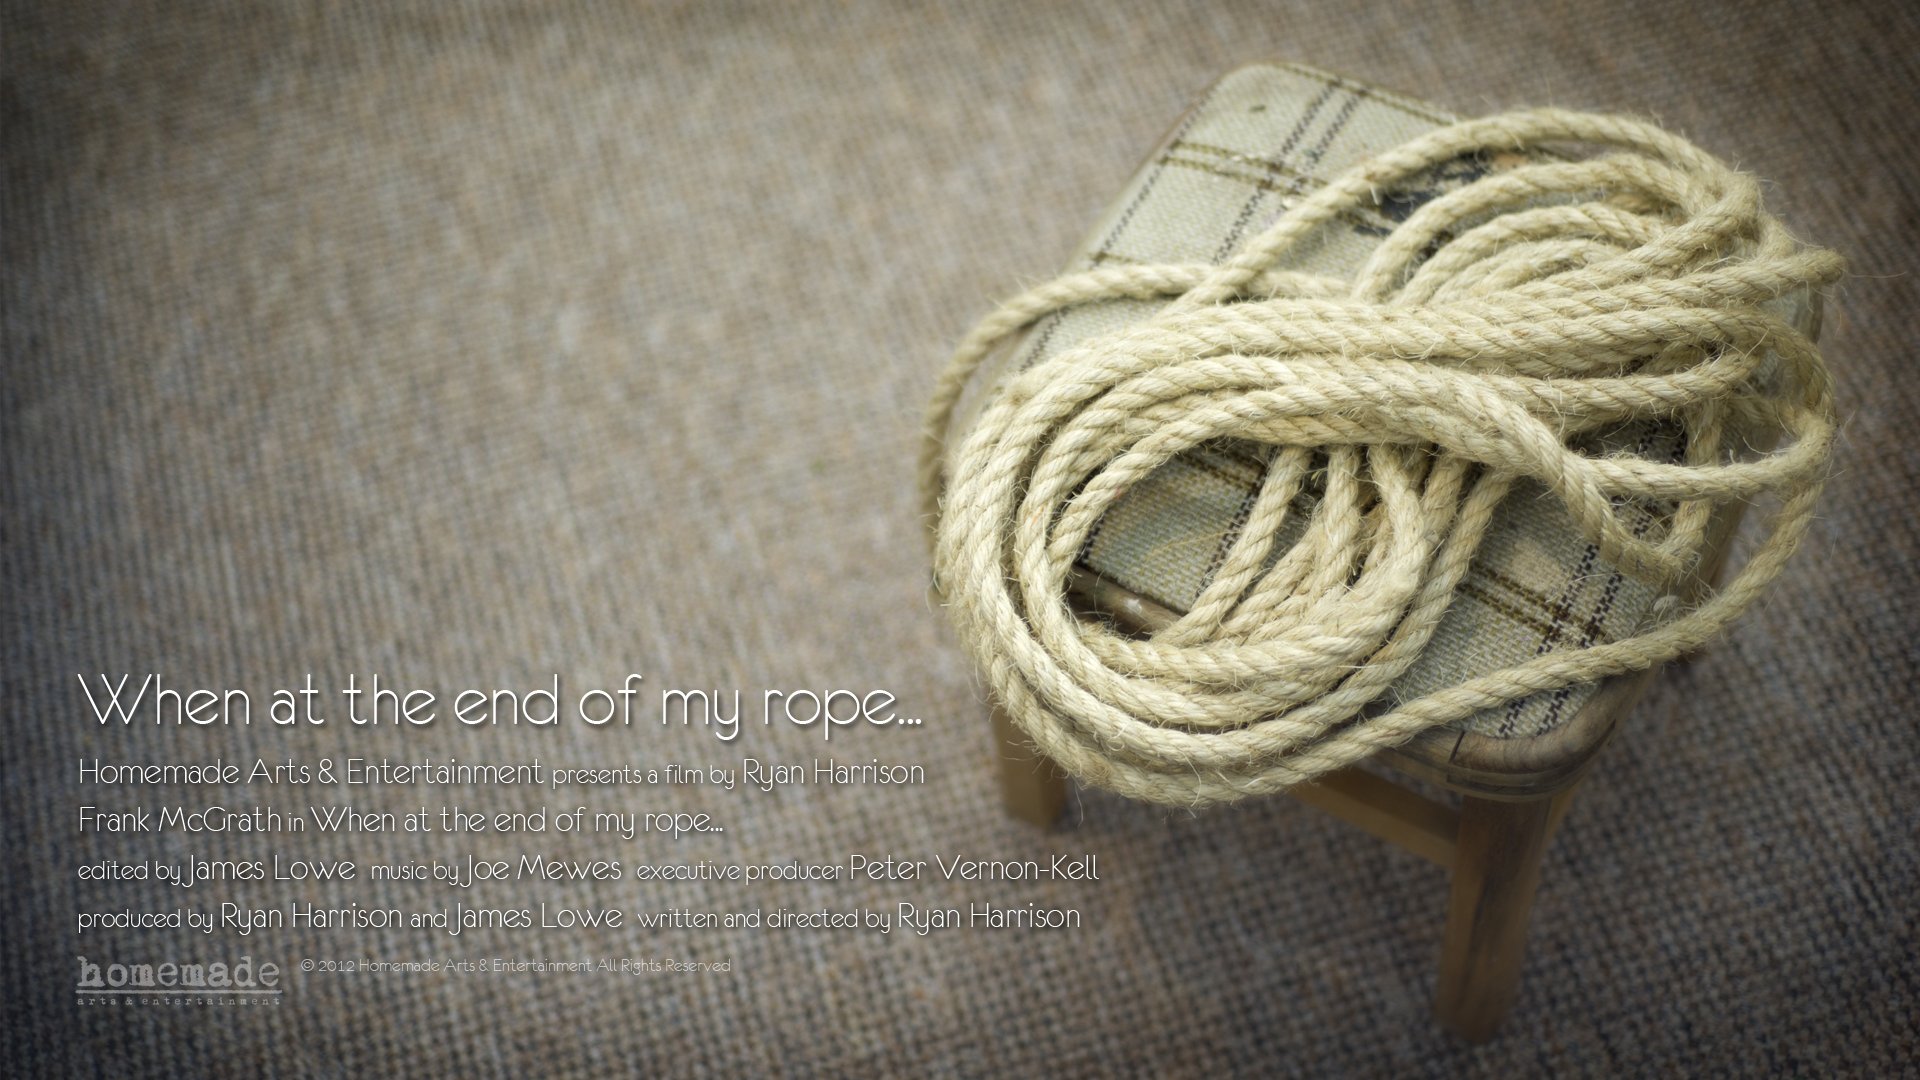 Promo for When at the end of my rope...